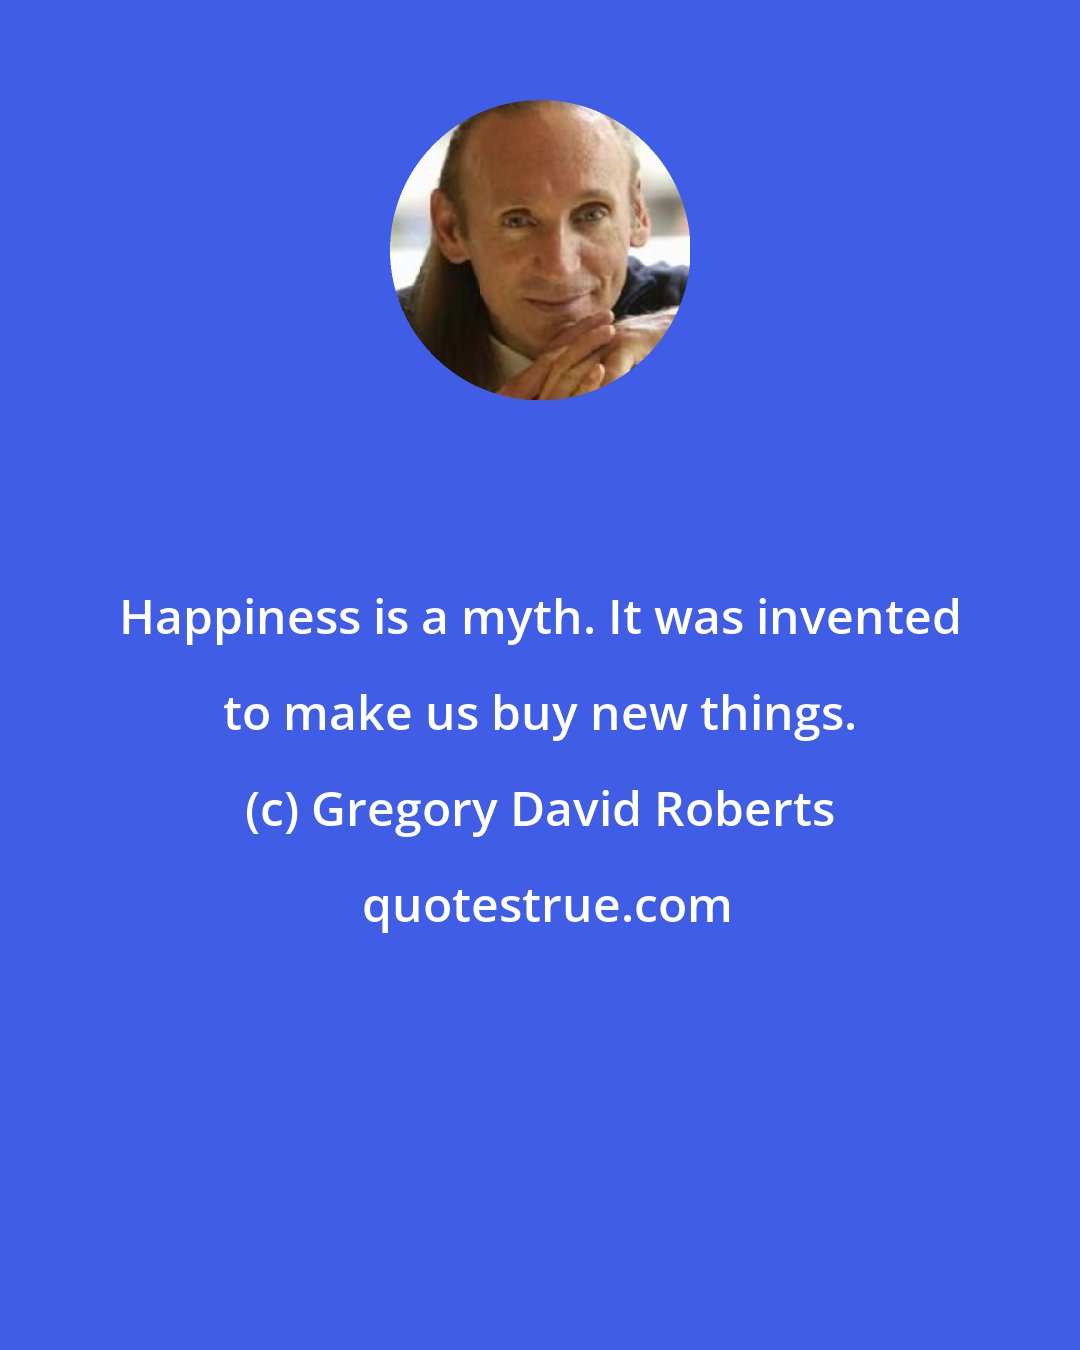 Gregory David Roberts: Happiness is a myth. It was invented to make us buy new things.